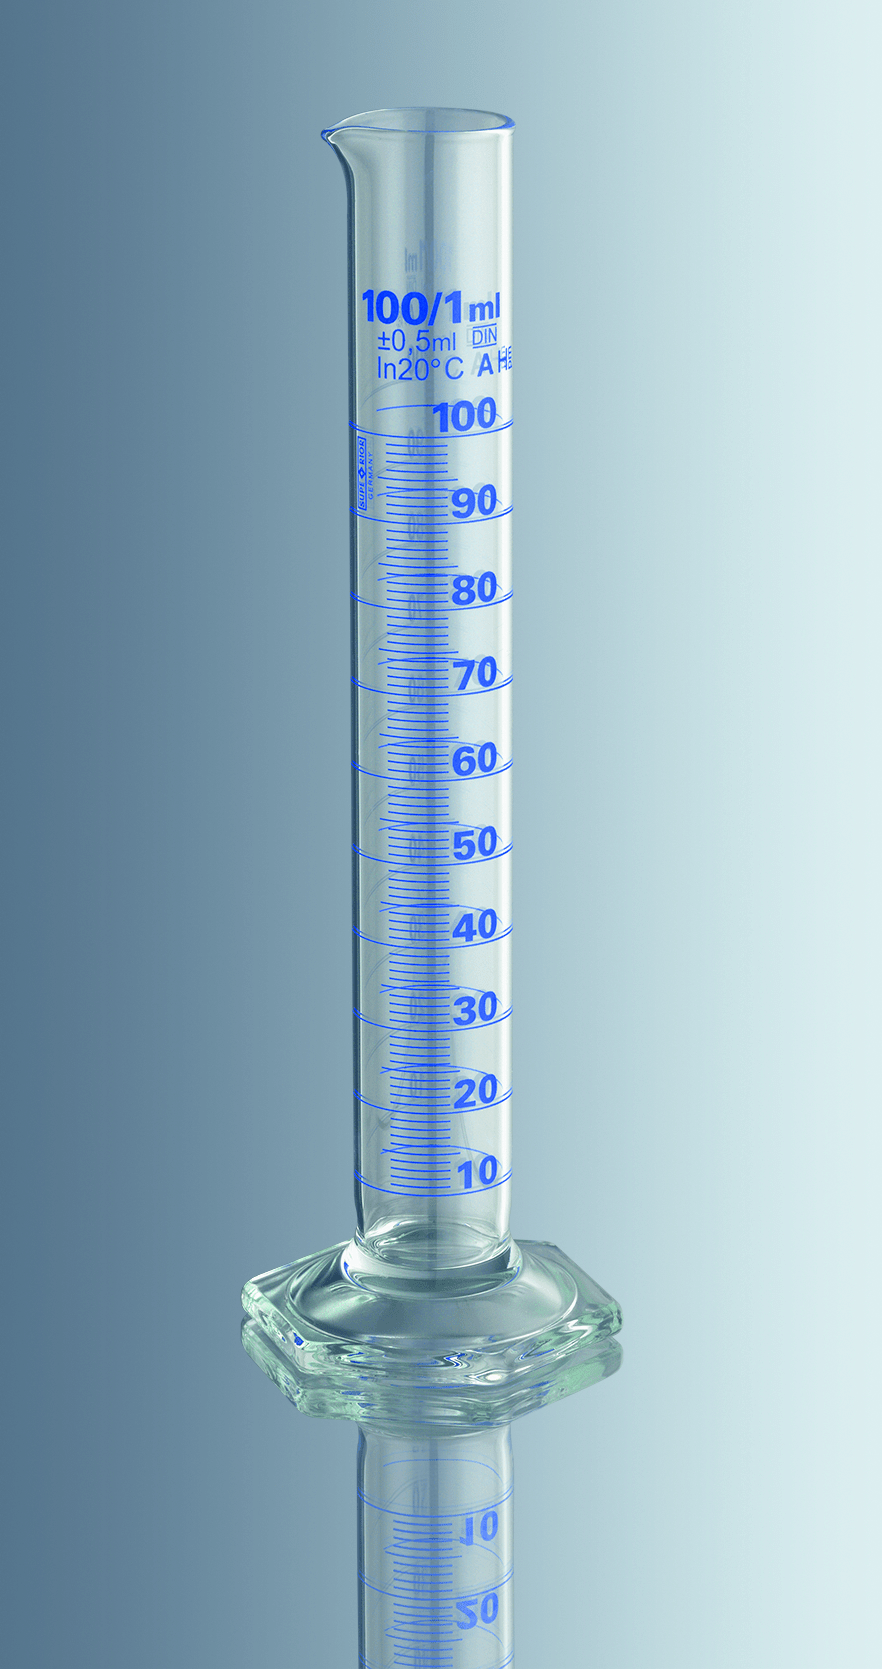 Marienfeld (Germany) Measuring Cylinder 500ml Class A(Lot Certified) - Hex based,High quality Borosil.Glass